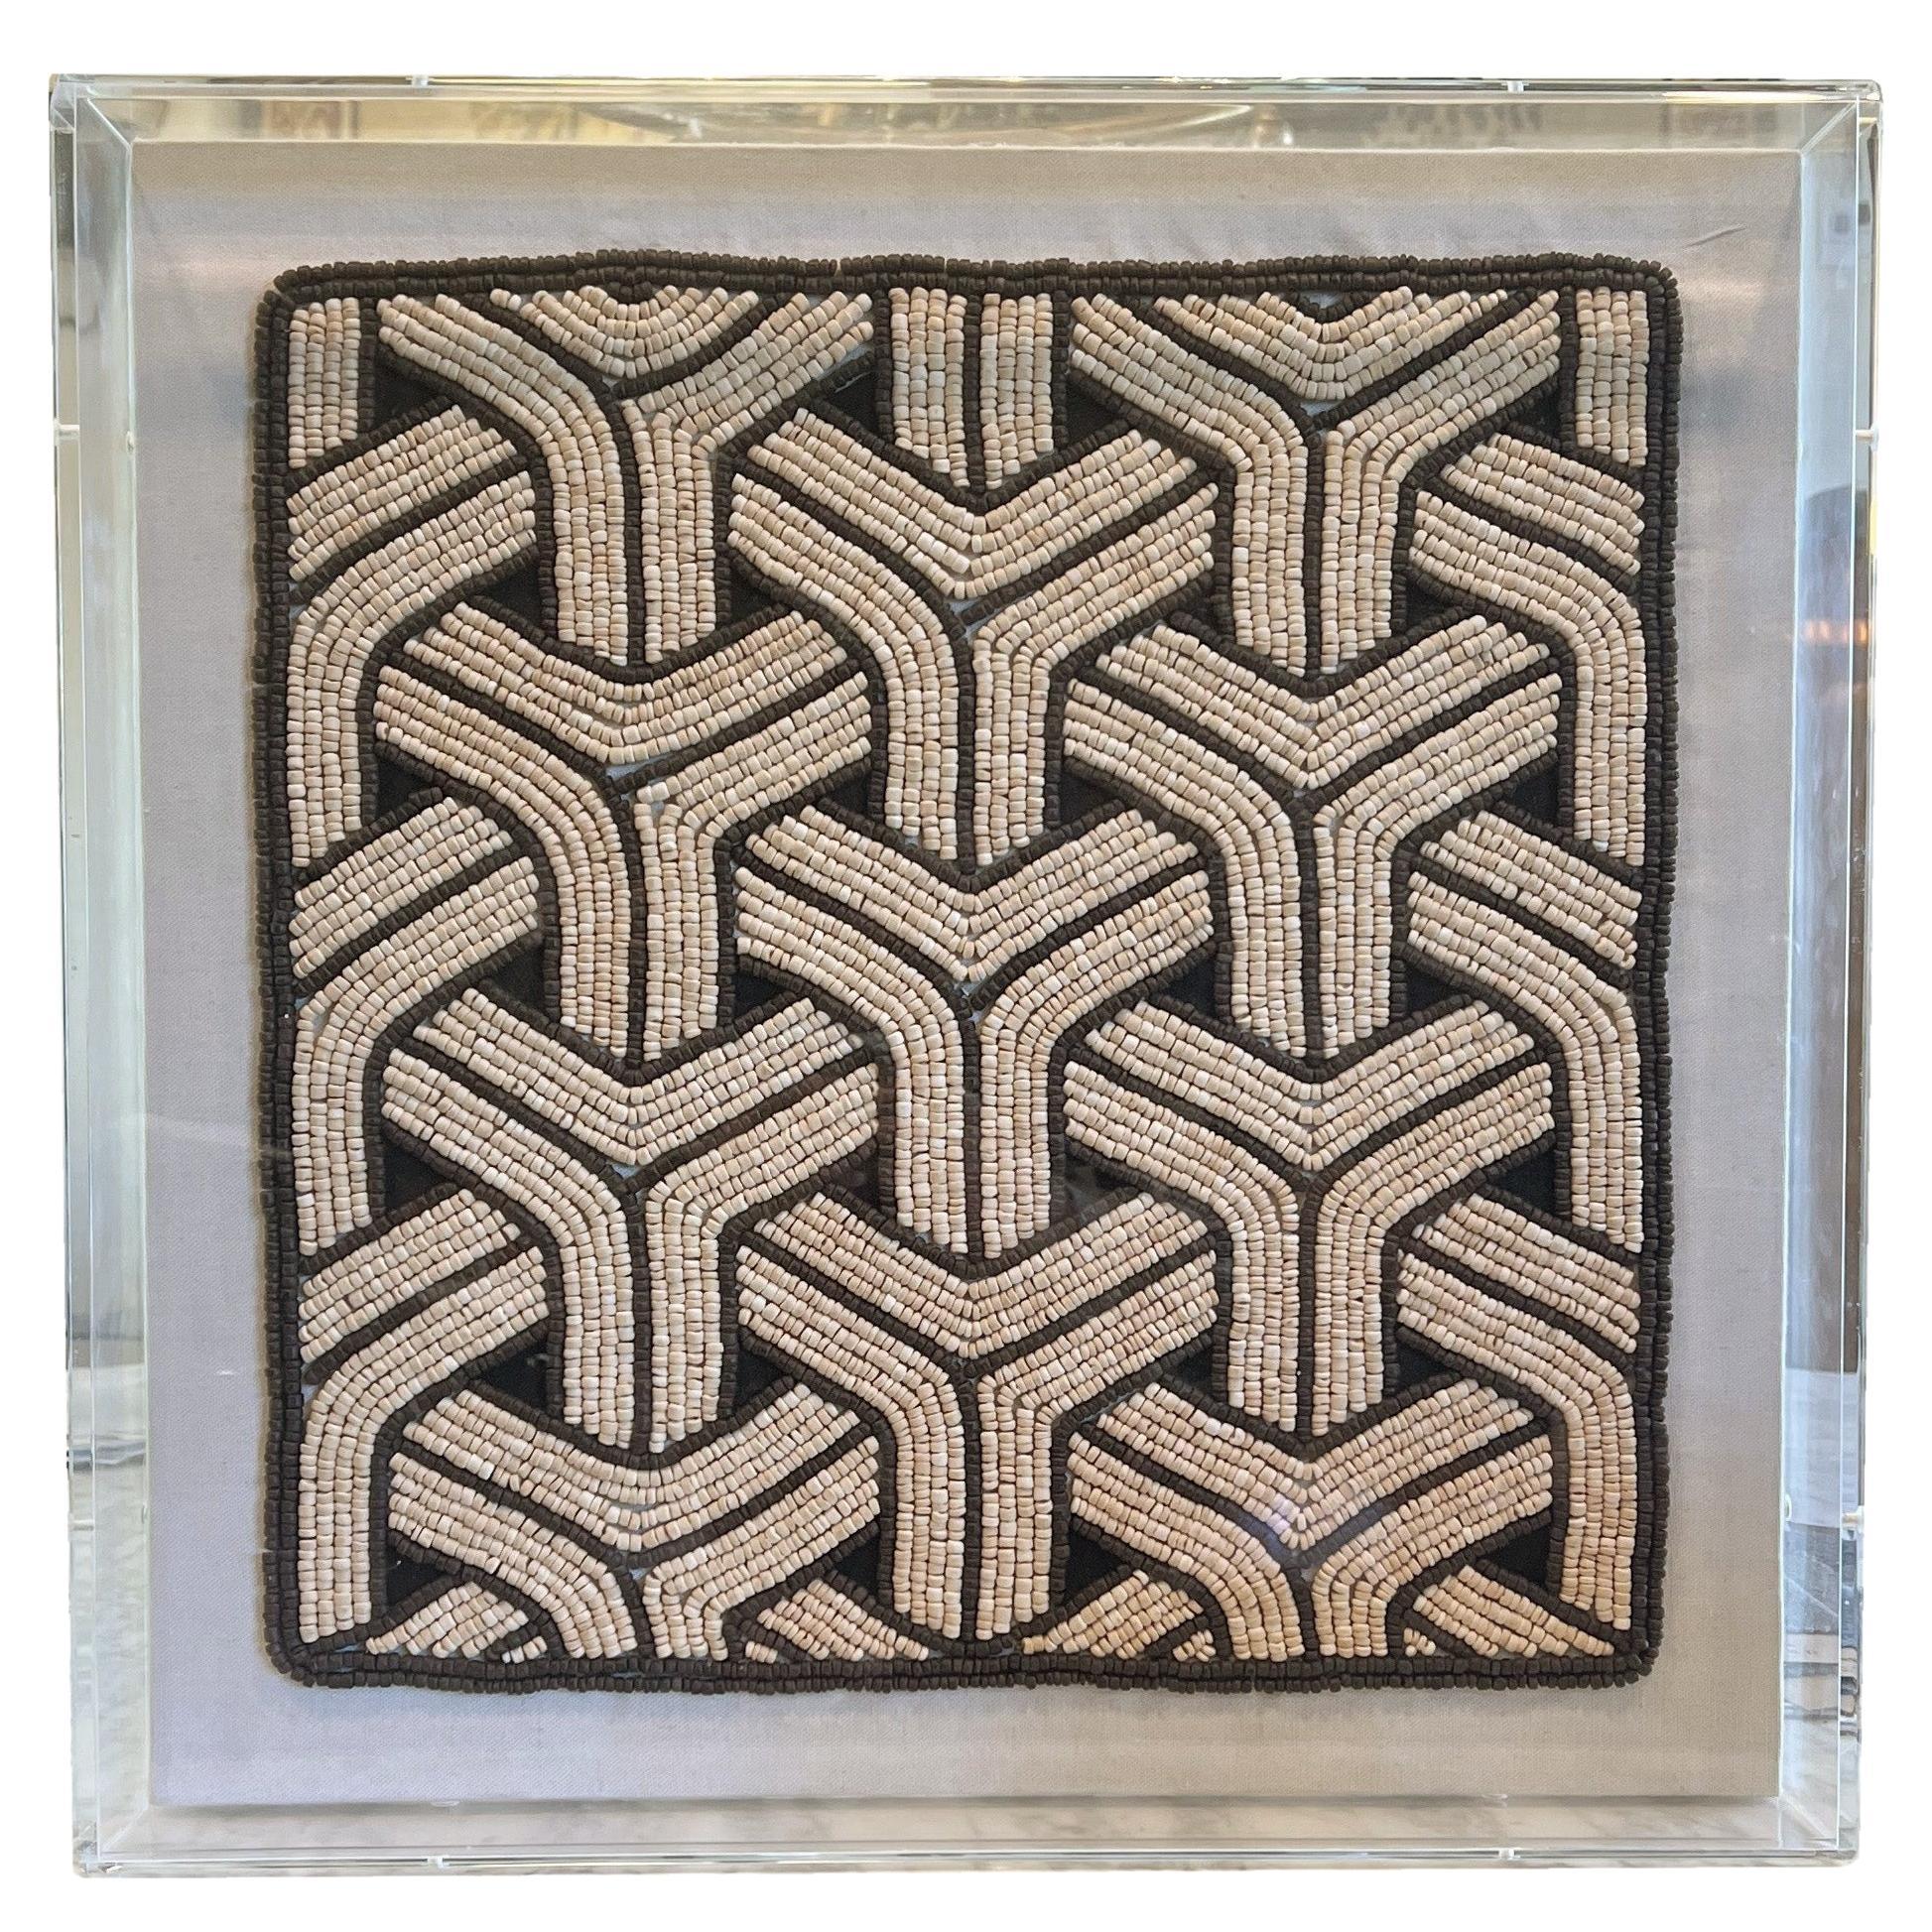 Geometric Art with Hand-Woven Cocoa Beads For Sale